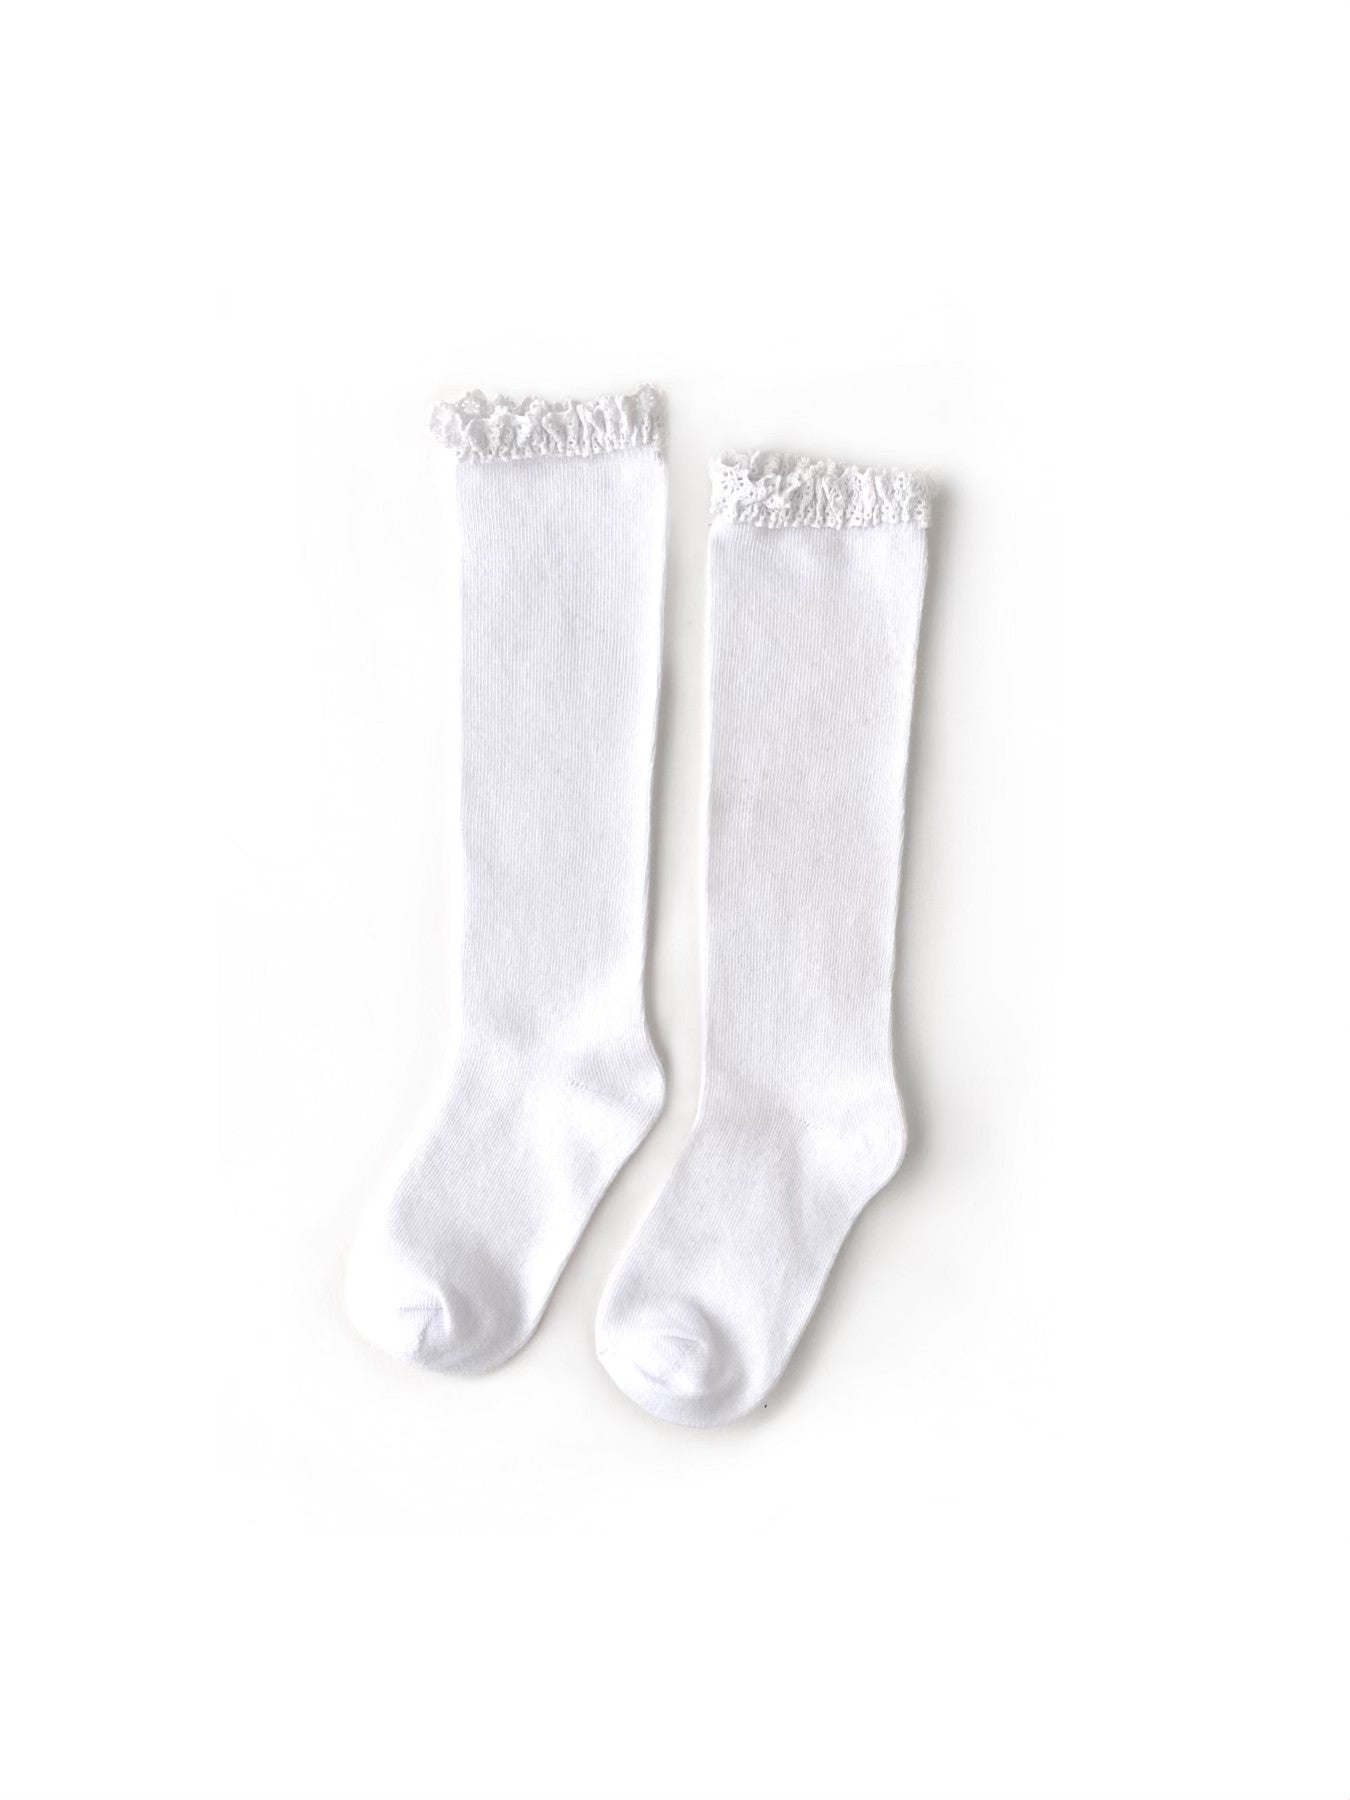 Little Stocking Co. Neutral Lace Top Knee High Socks